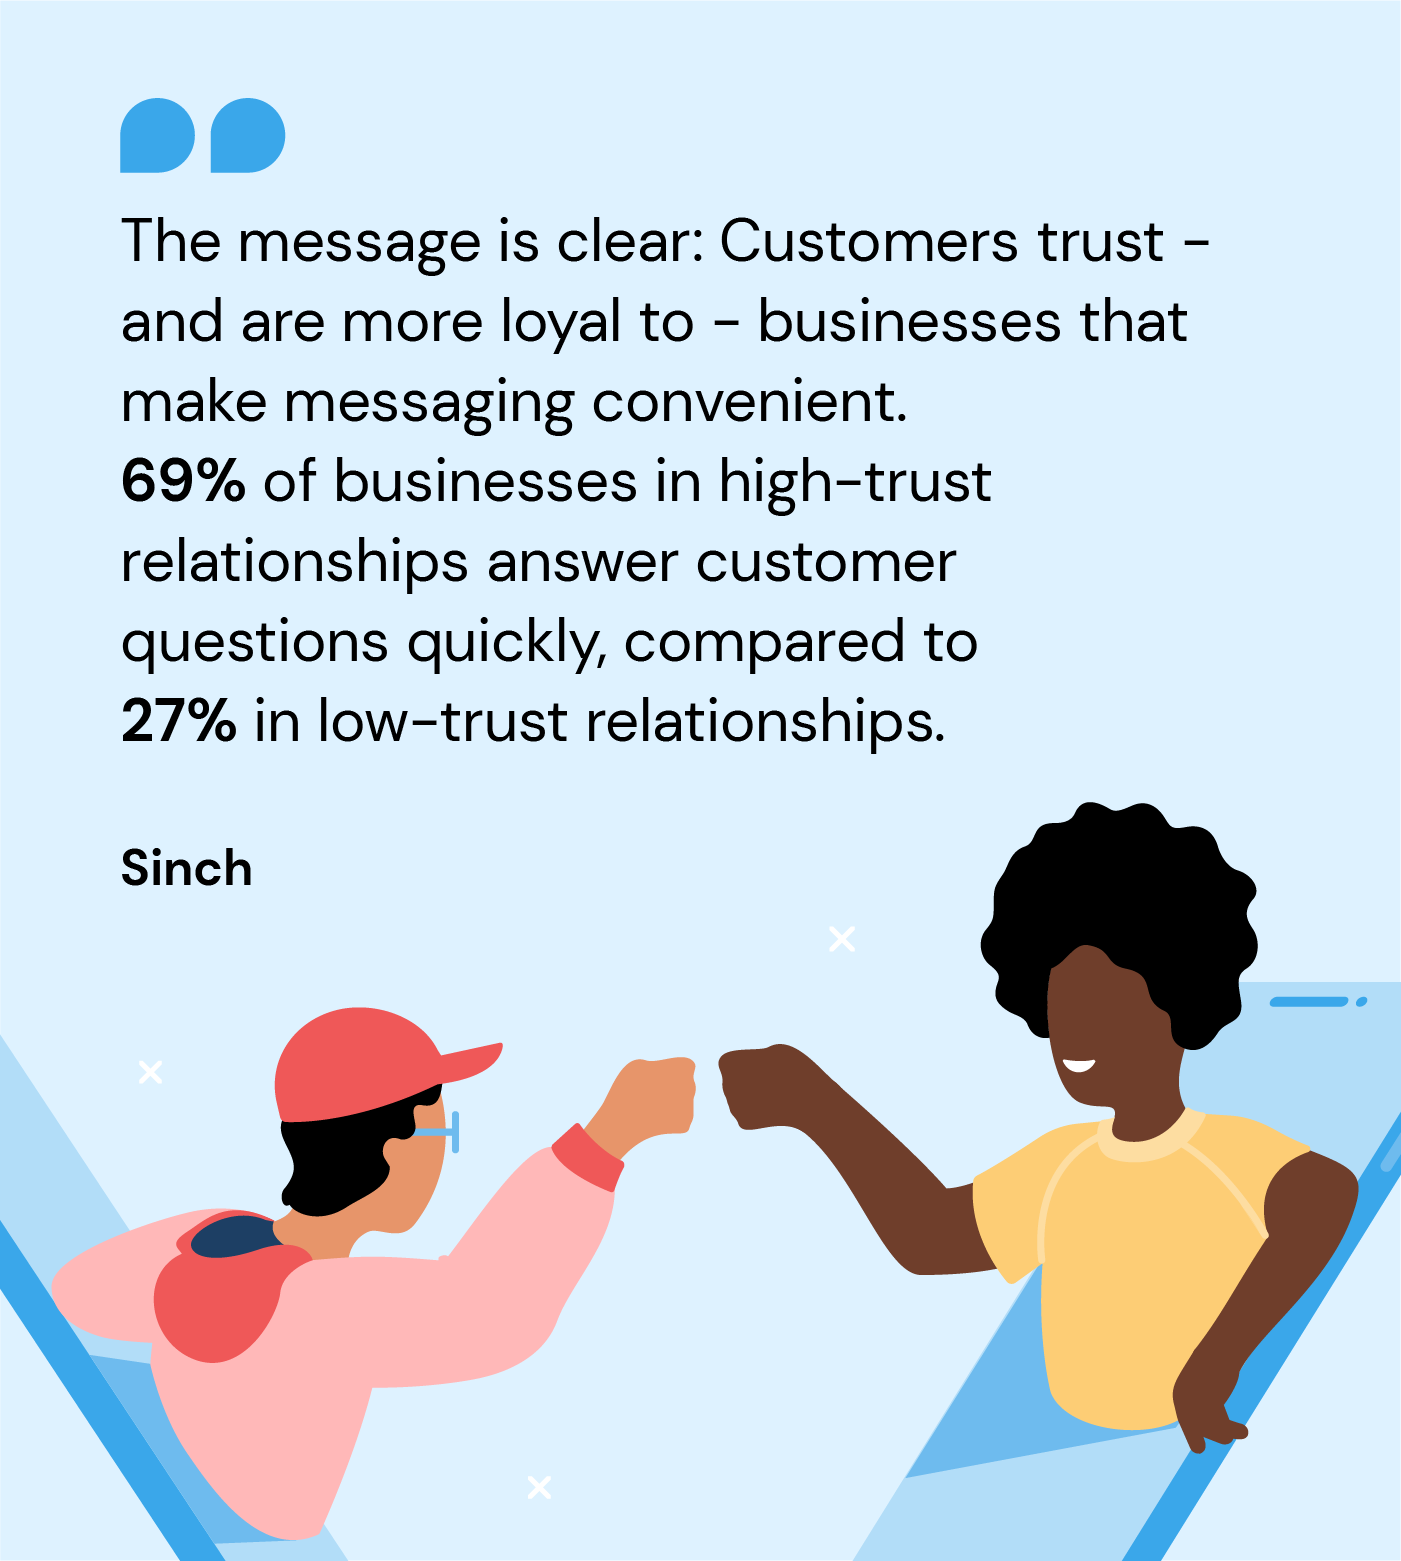 Image shows two phone users fist-bumping, one in a red jacket and red cap with blue glasses and one in a yellow shirt. Text reads "The message is clear: customers trust and are more loyal to businesses that make messaging convenient. 69% of businesses in high-trust relationships answer customer questions quickly, compared to 27% in low-trust relationships.